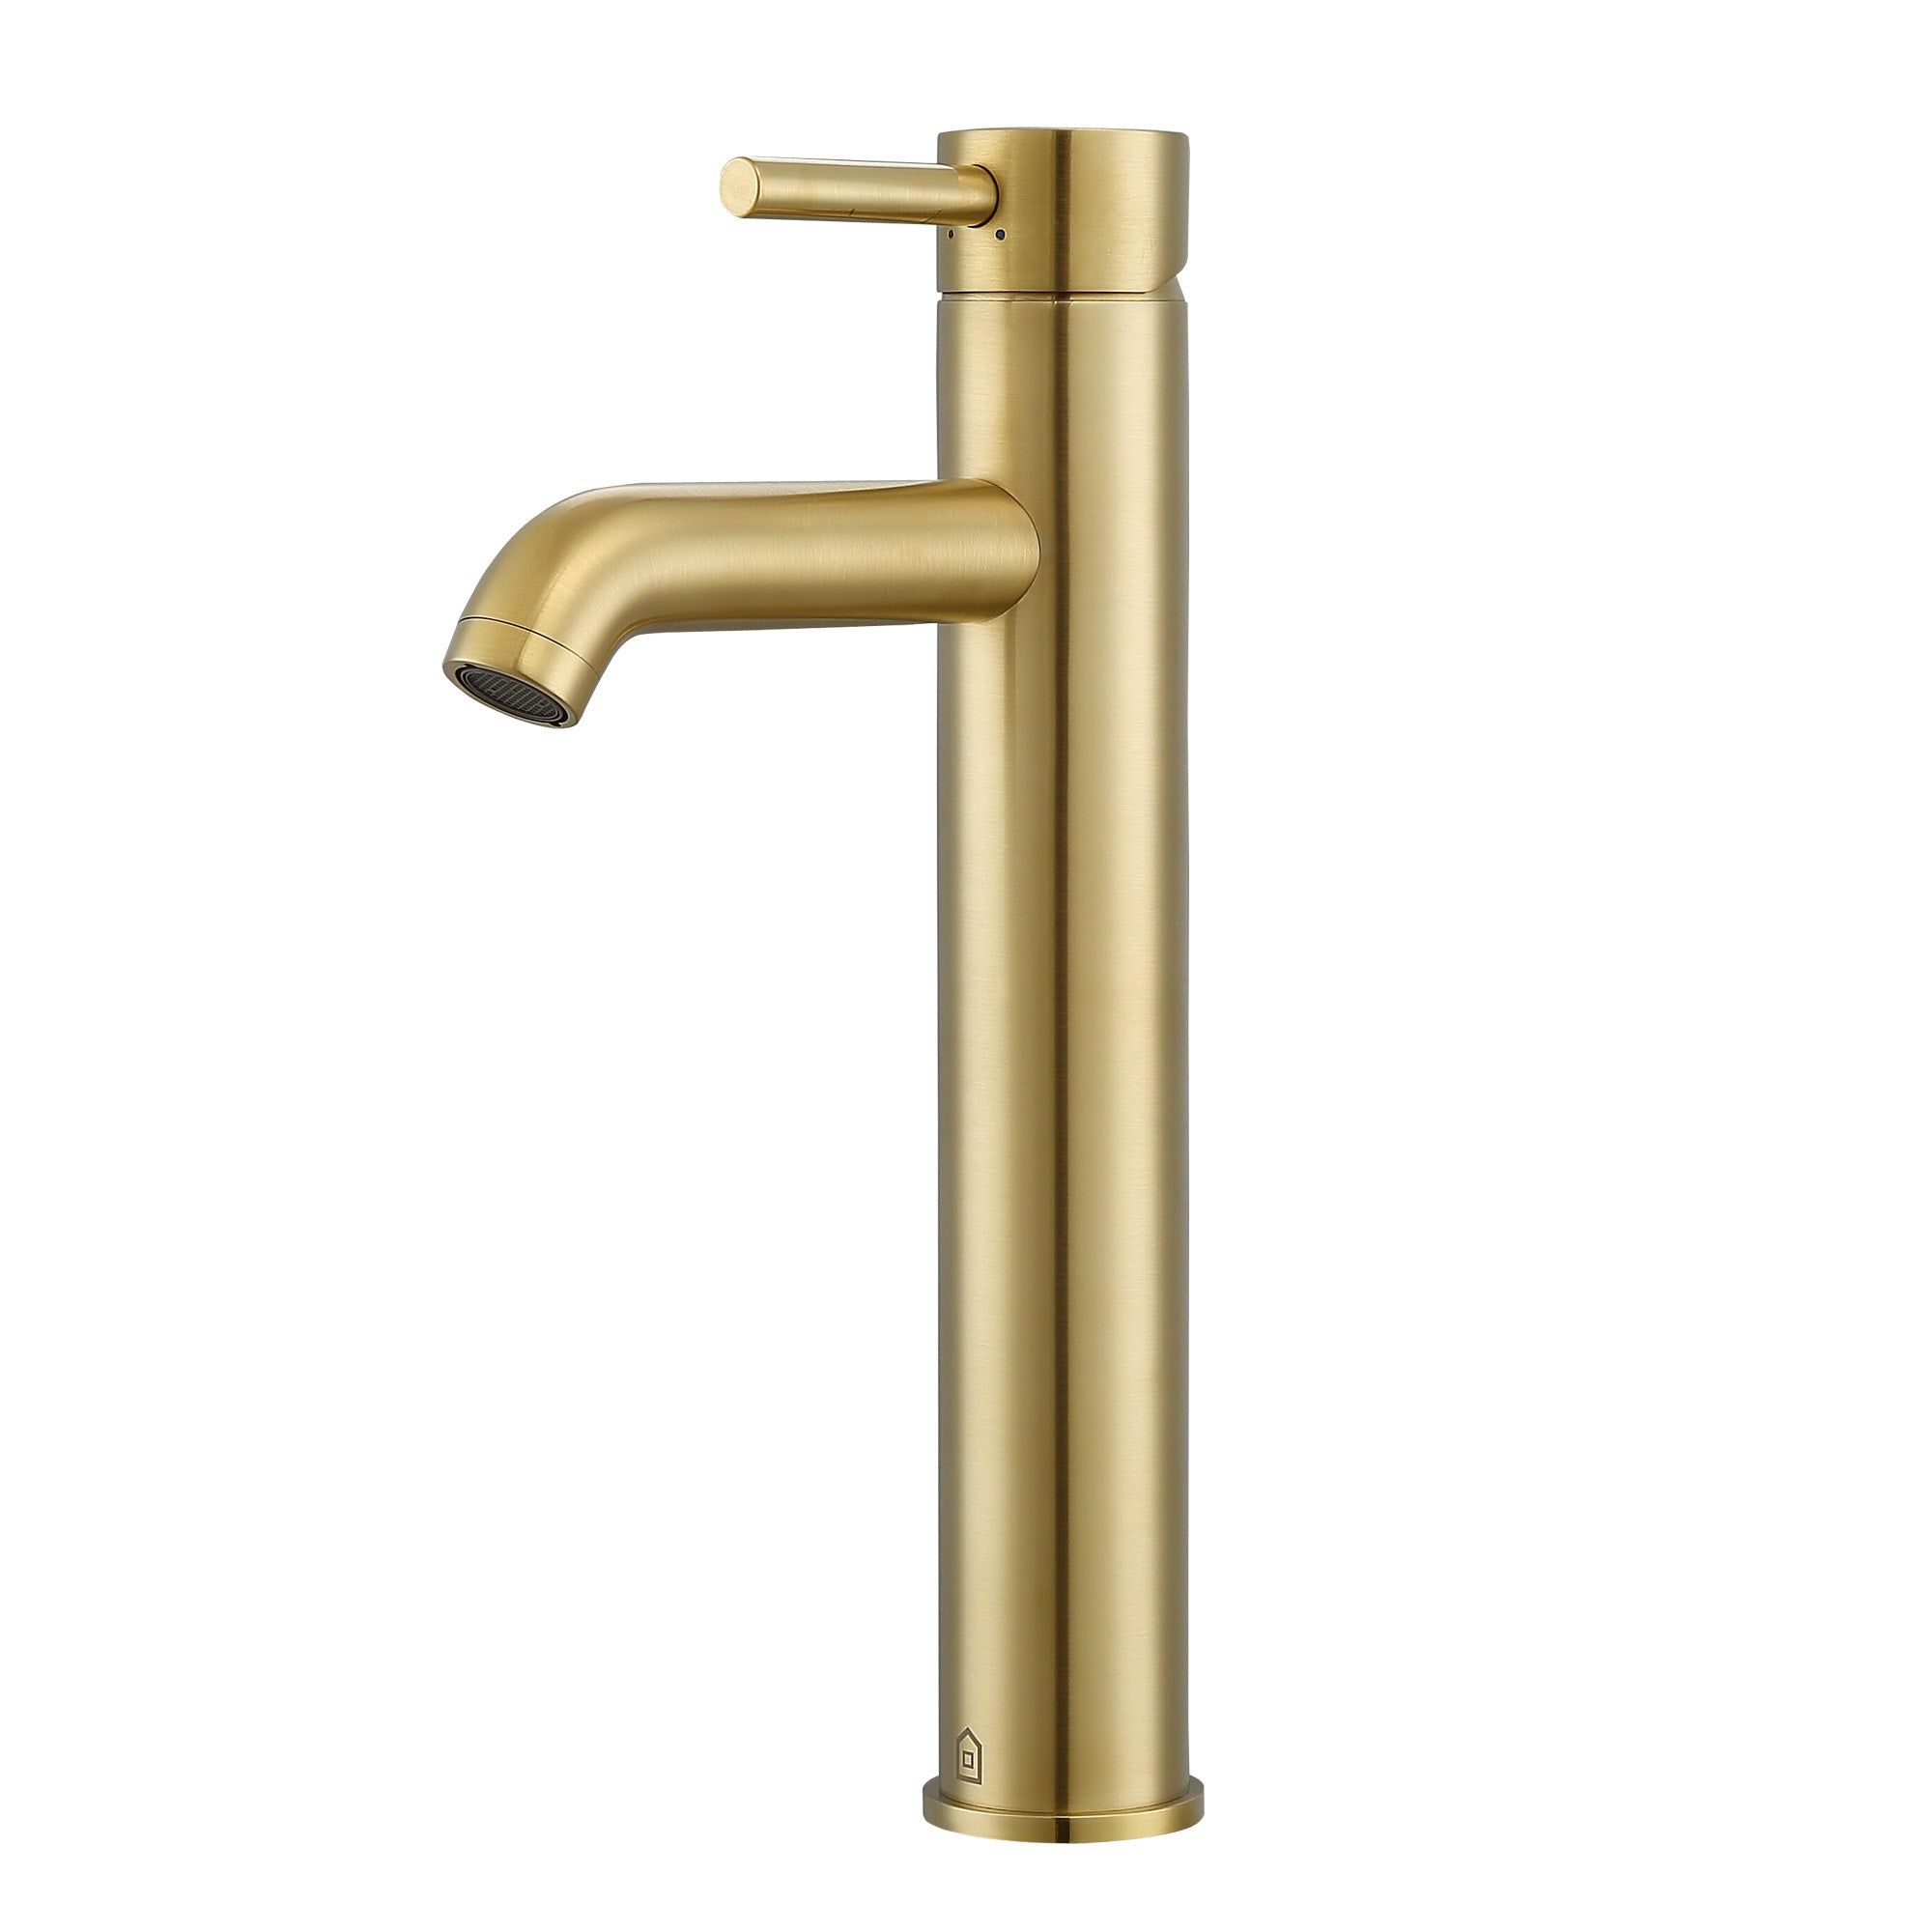 Ancona Argenta Single Hole Single-Handle Vessel Bathroom Faucet in Brushed Champagne Gold